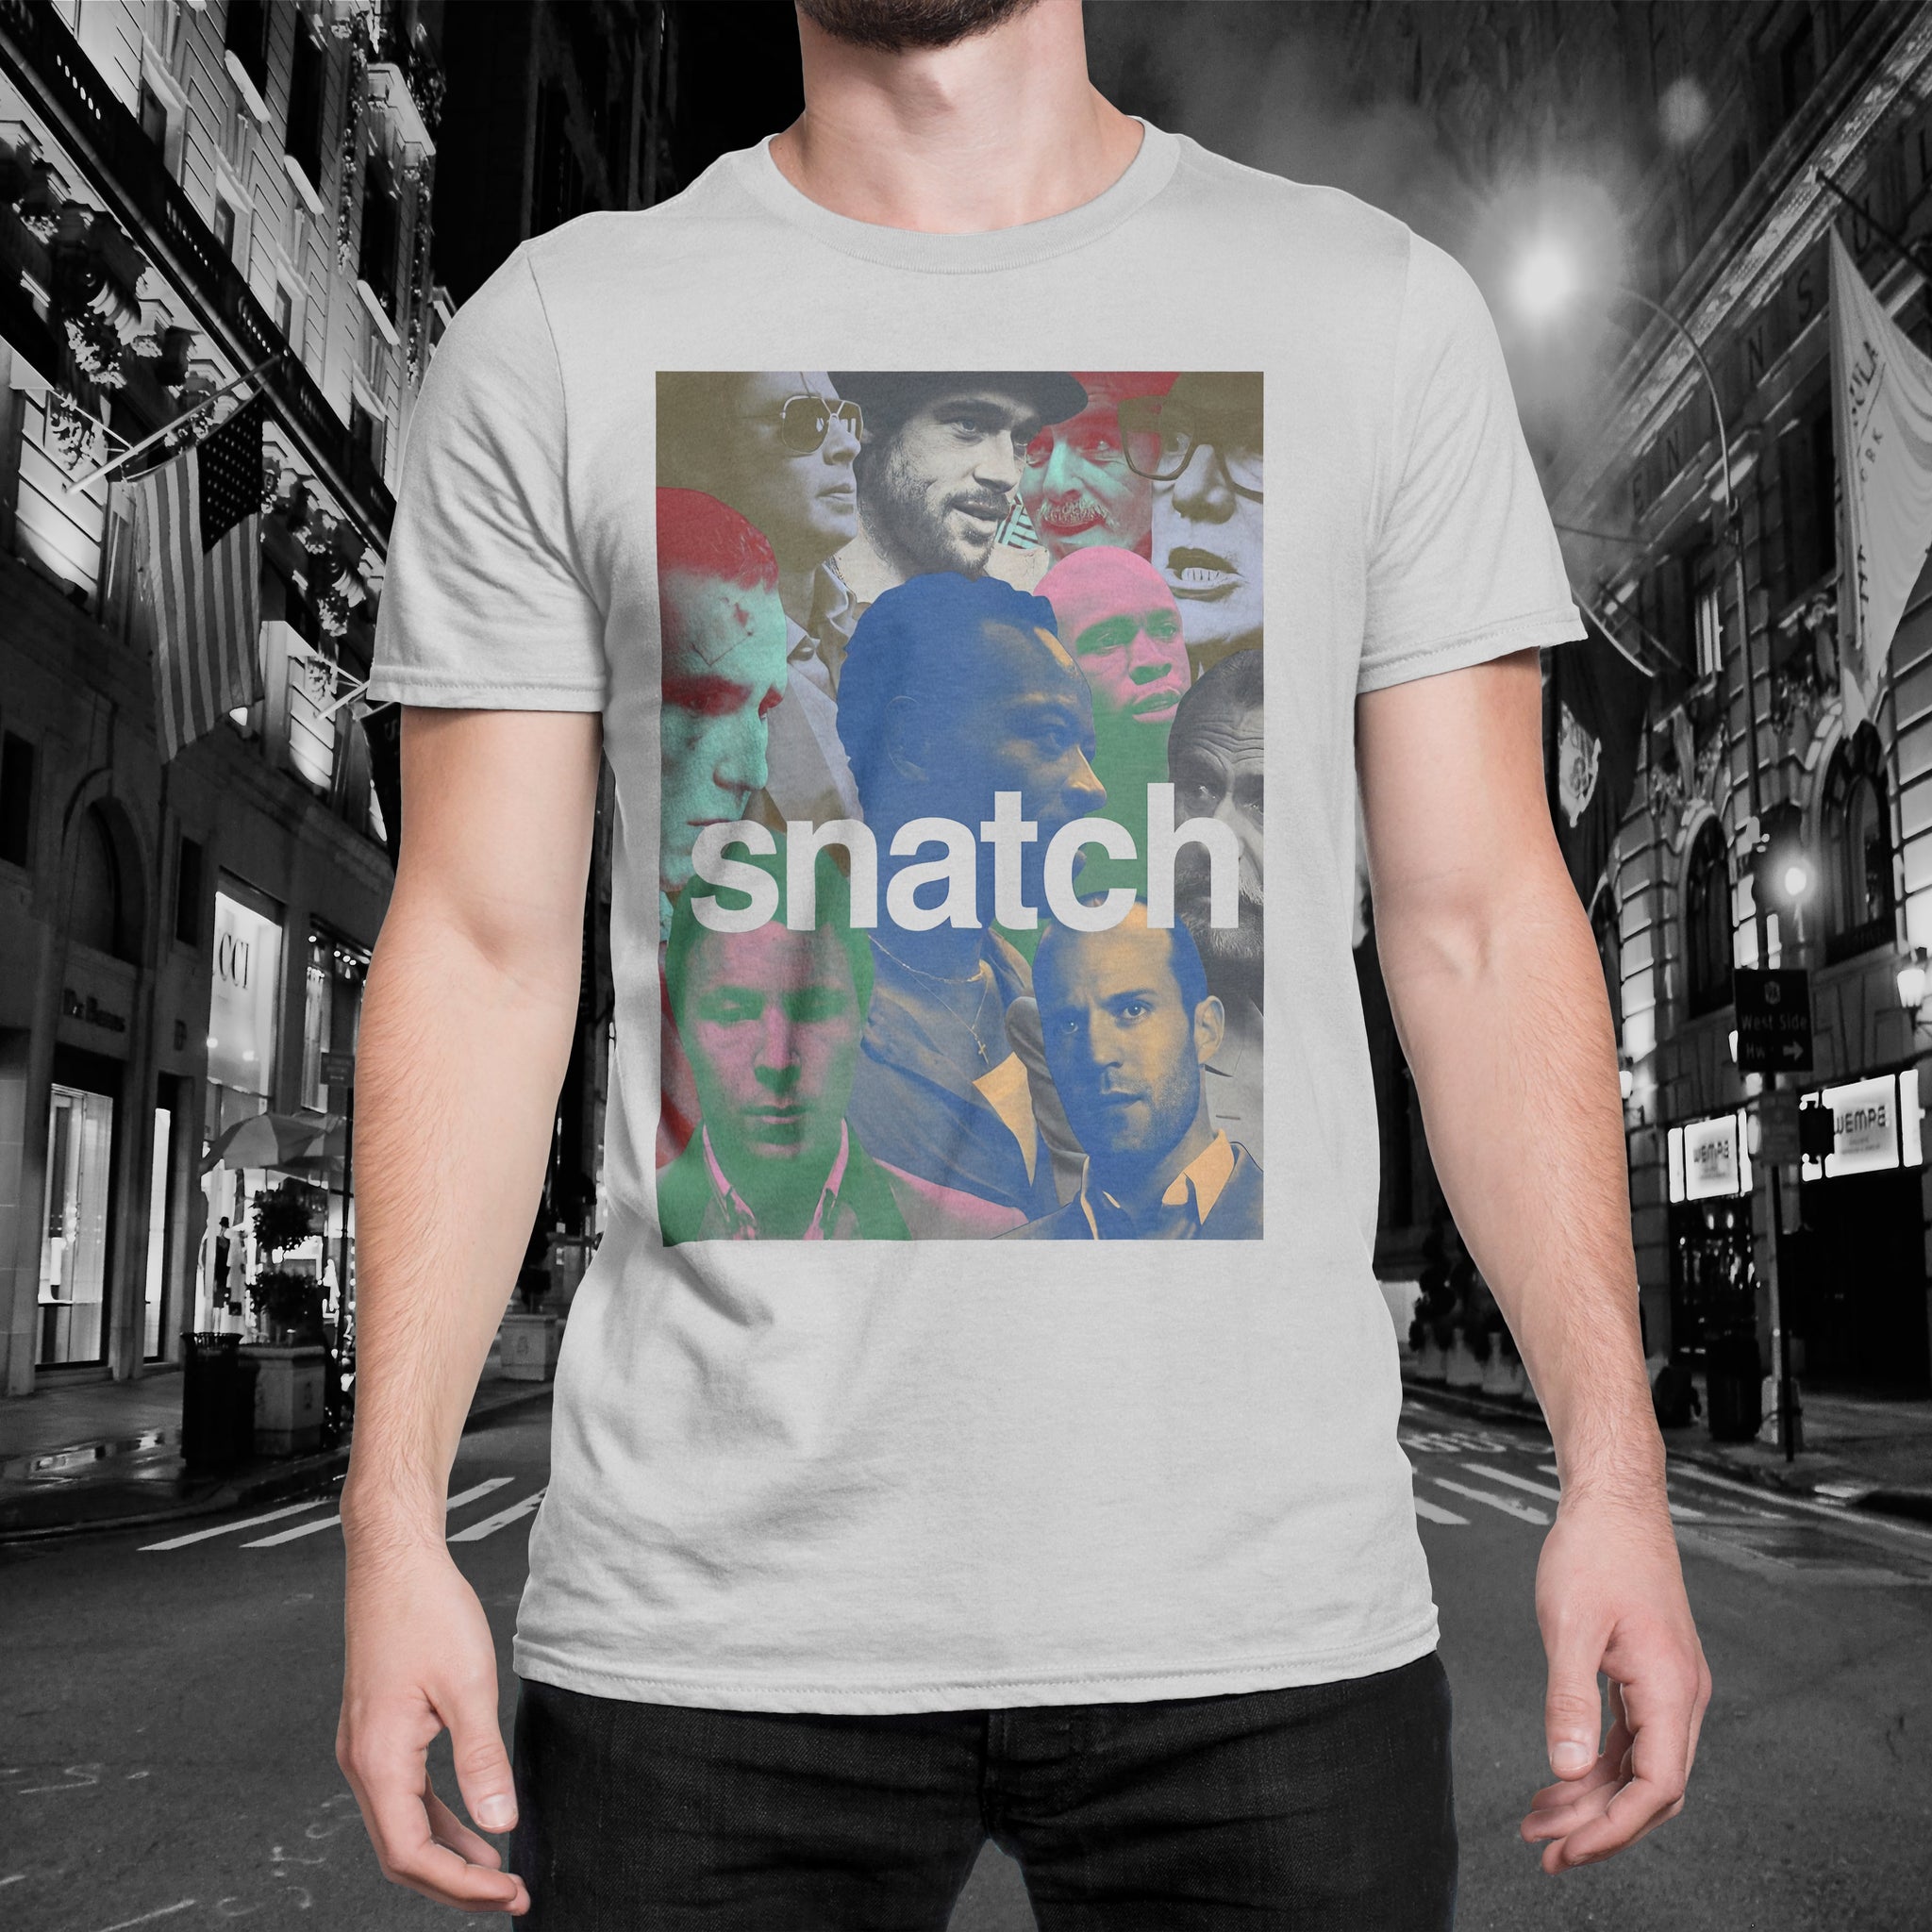 Snatch "Collage" Tee